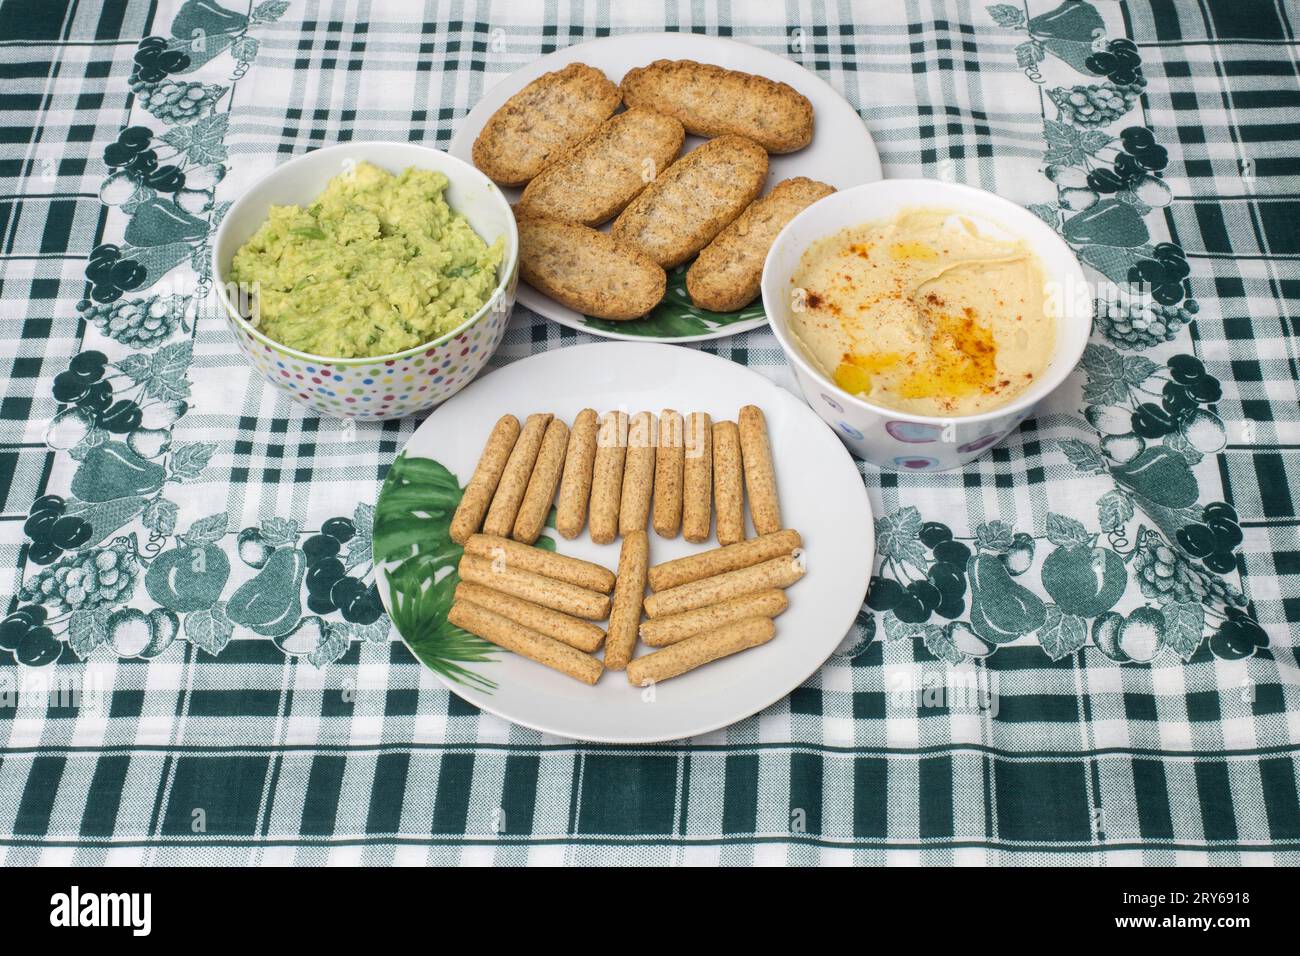 Two bowls of creamy hummus and guacamole dip are placed on a table with a leafy and geometric tablecloth, along with whole wheat toast and breadsticks Stock Photo